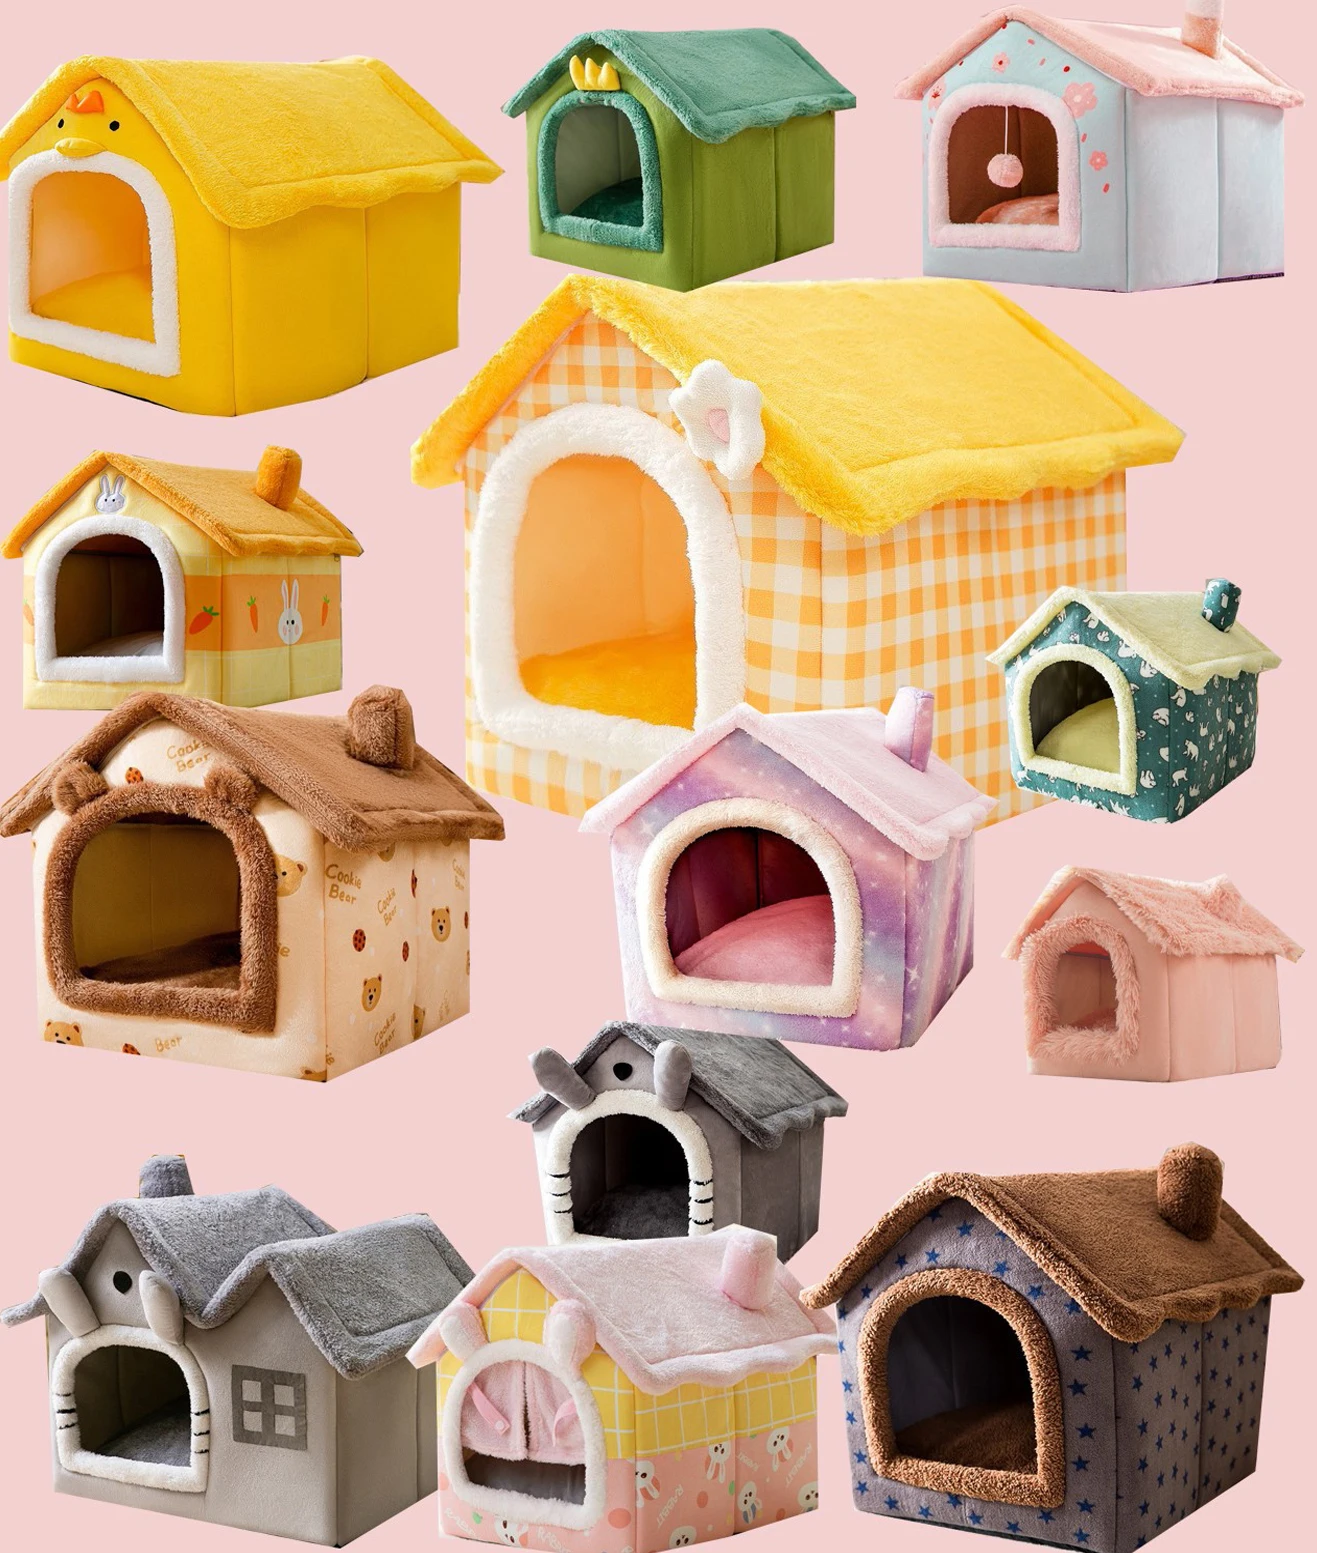 Cat Bed Bedroom Warm Cave Doghouse And Removable Cushions Soft Indoor Enclosed House Doghouse Cat Sofa Kitten Pet Supplies